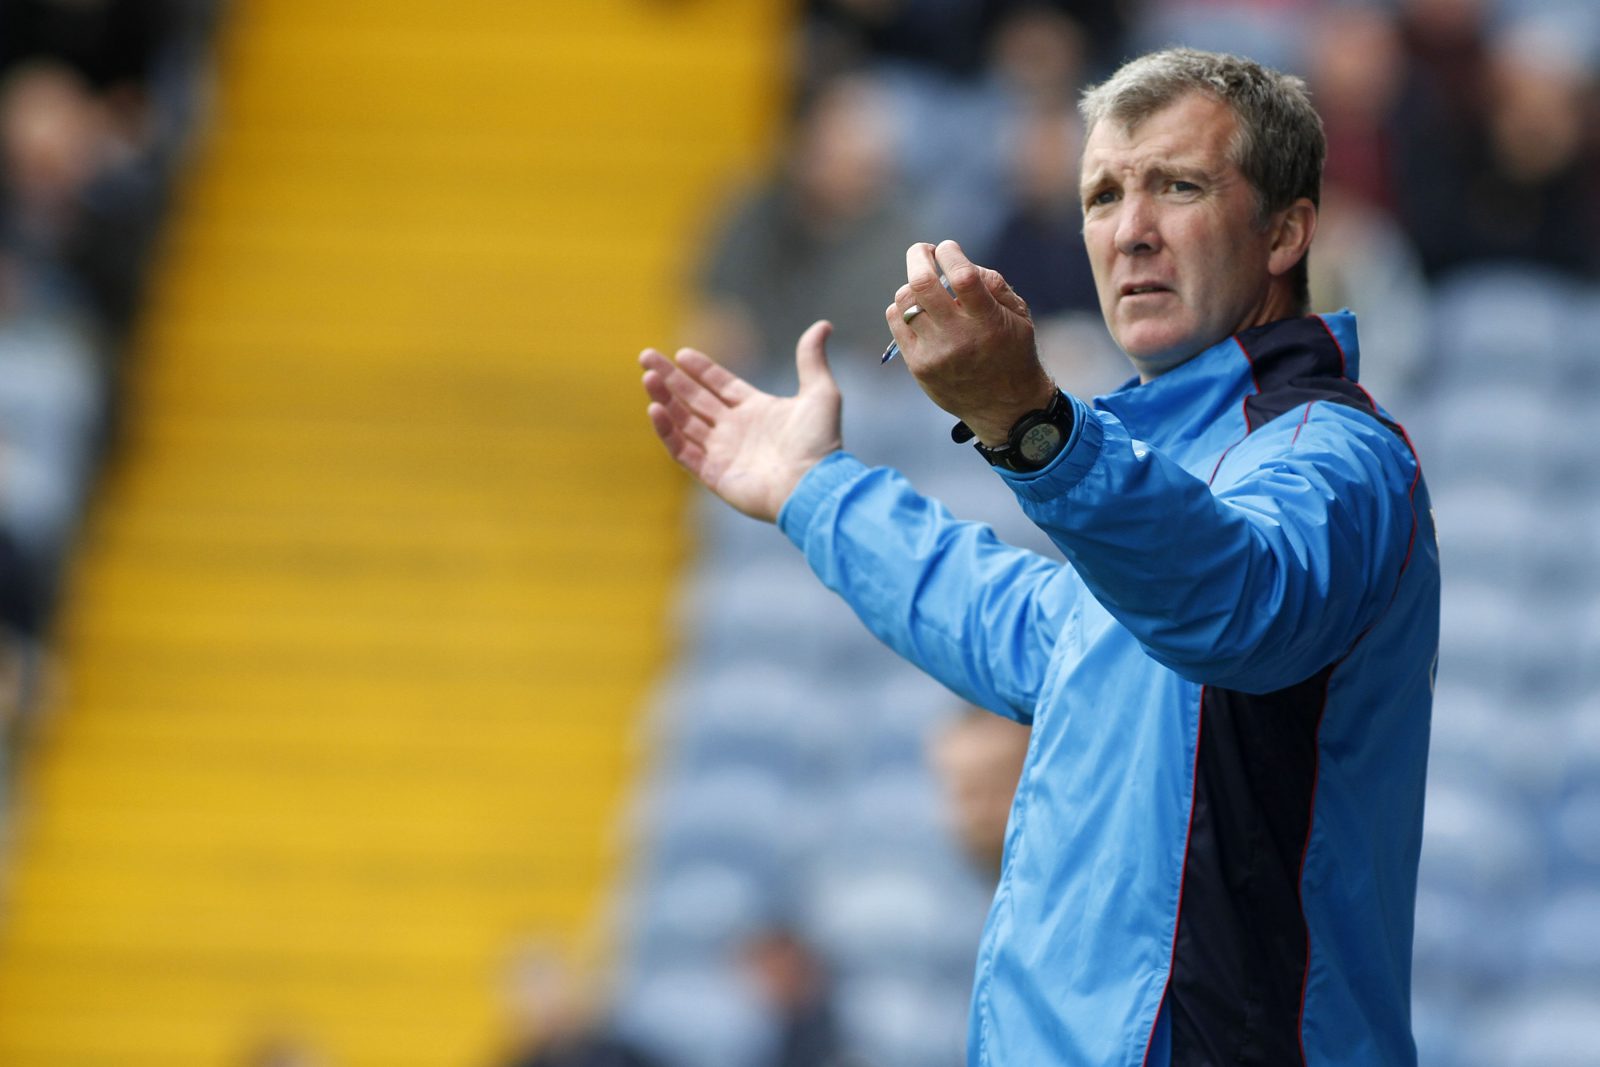 Jim Gannon podcast interview - Stockport County